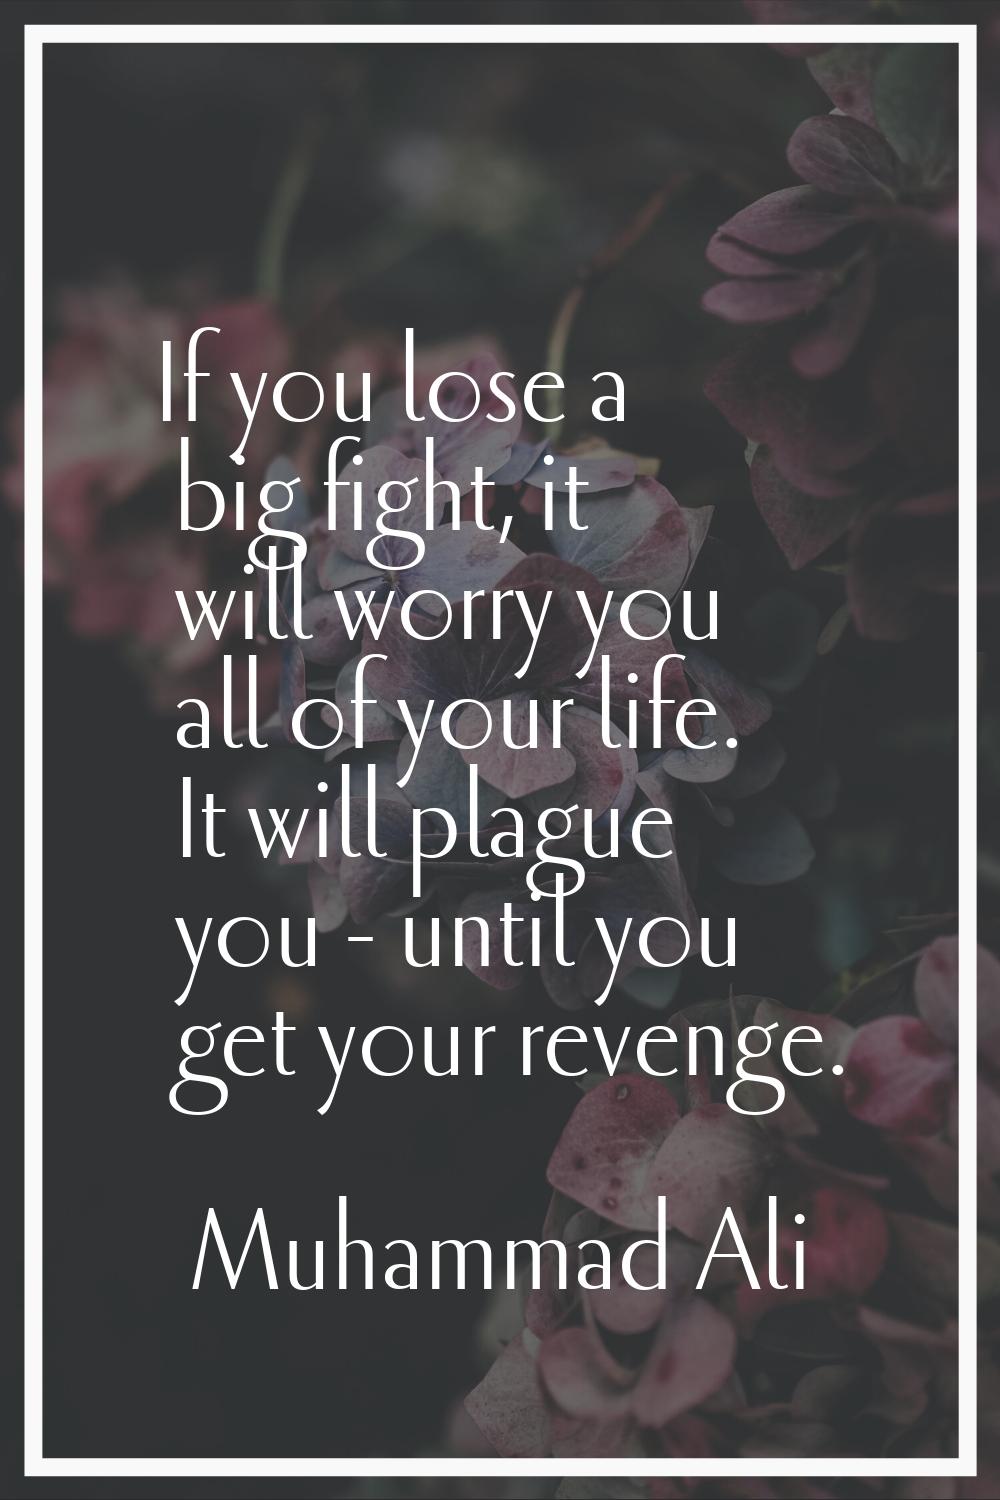 If you lose a big fight, it will worry you all of your life. It will plague you - until you get you